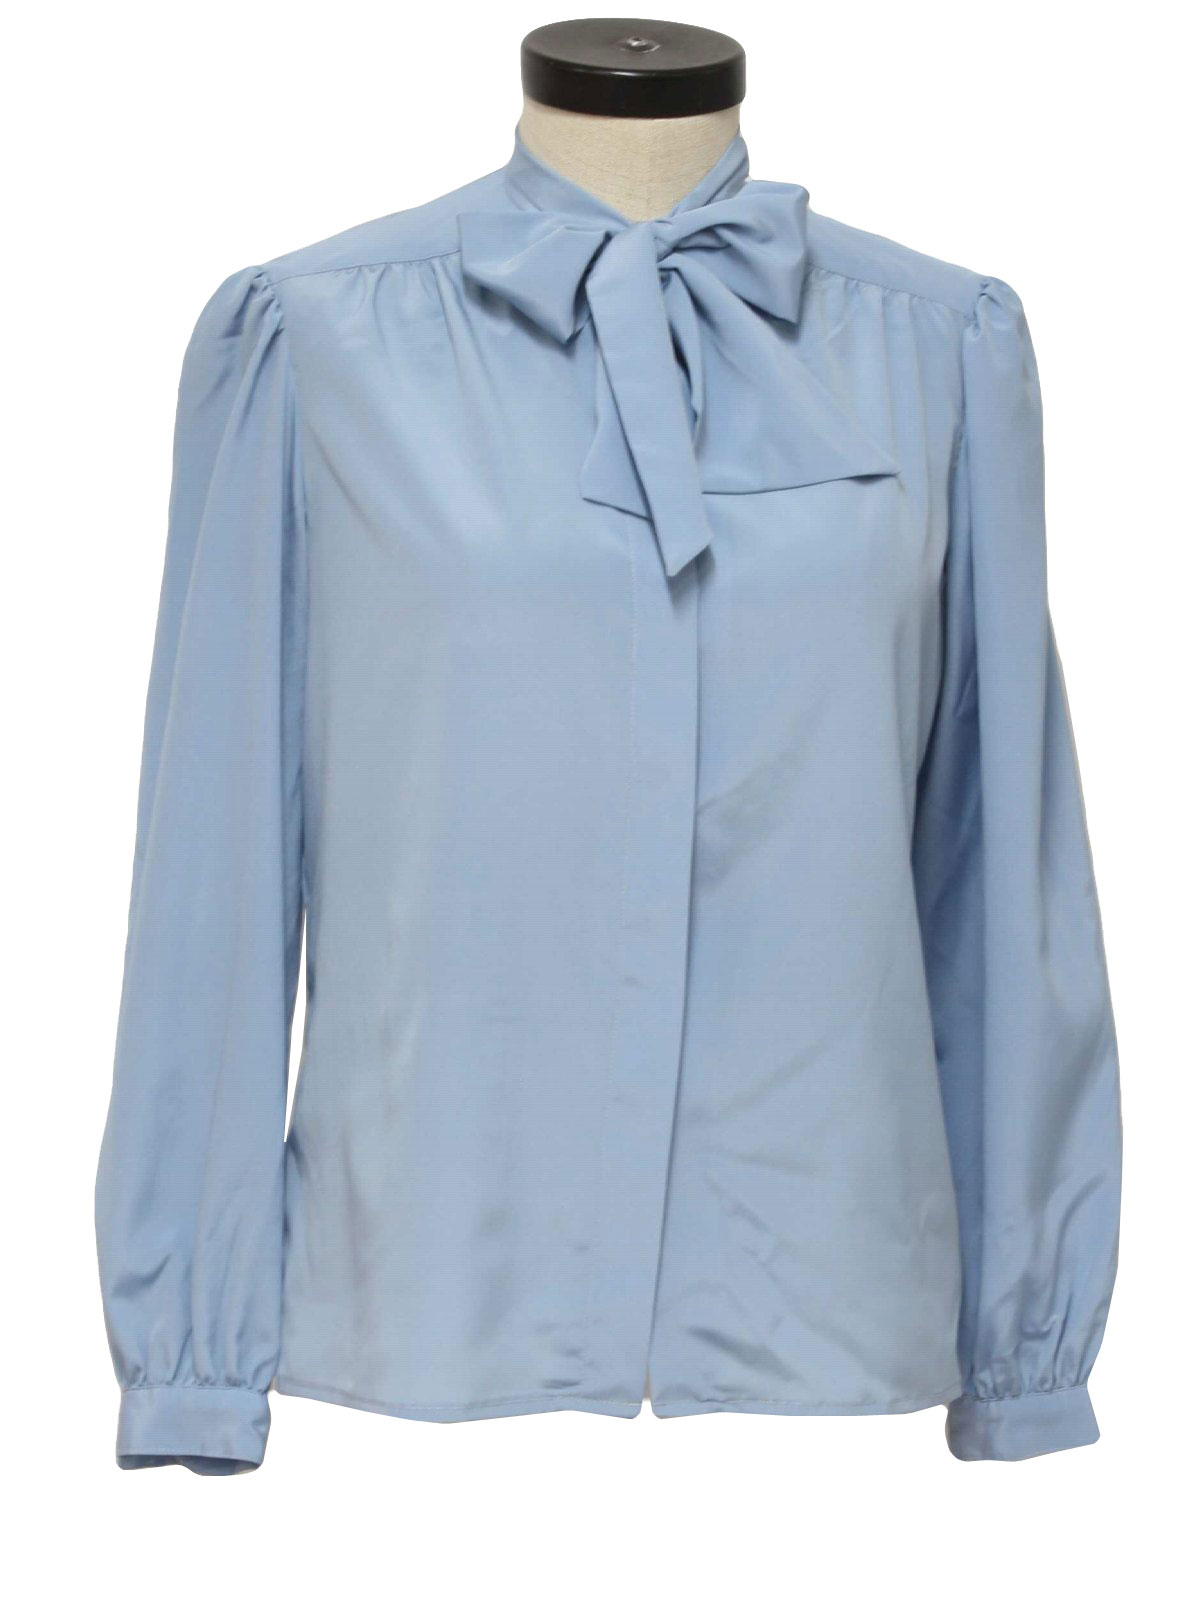 Retro 1970s Shirt: 70s -Signatures- Womens cloudy blue silky polyester ...